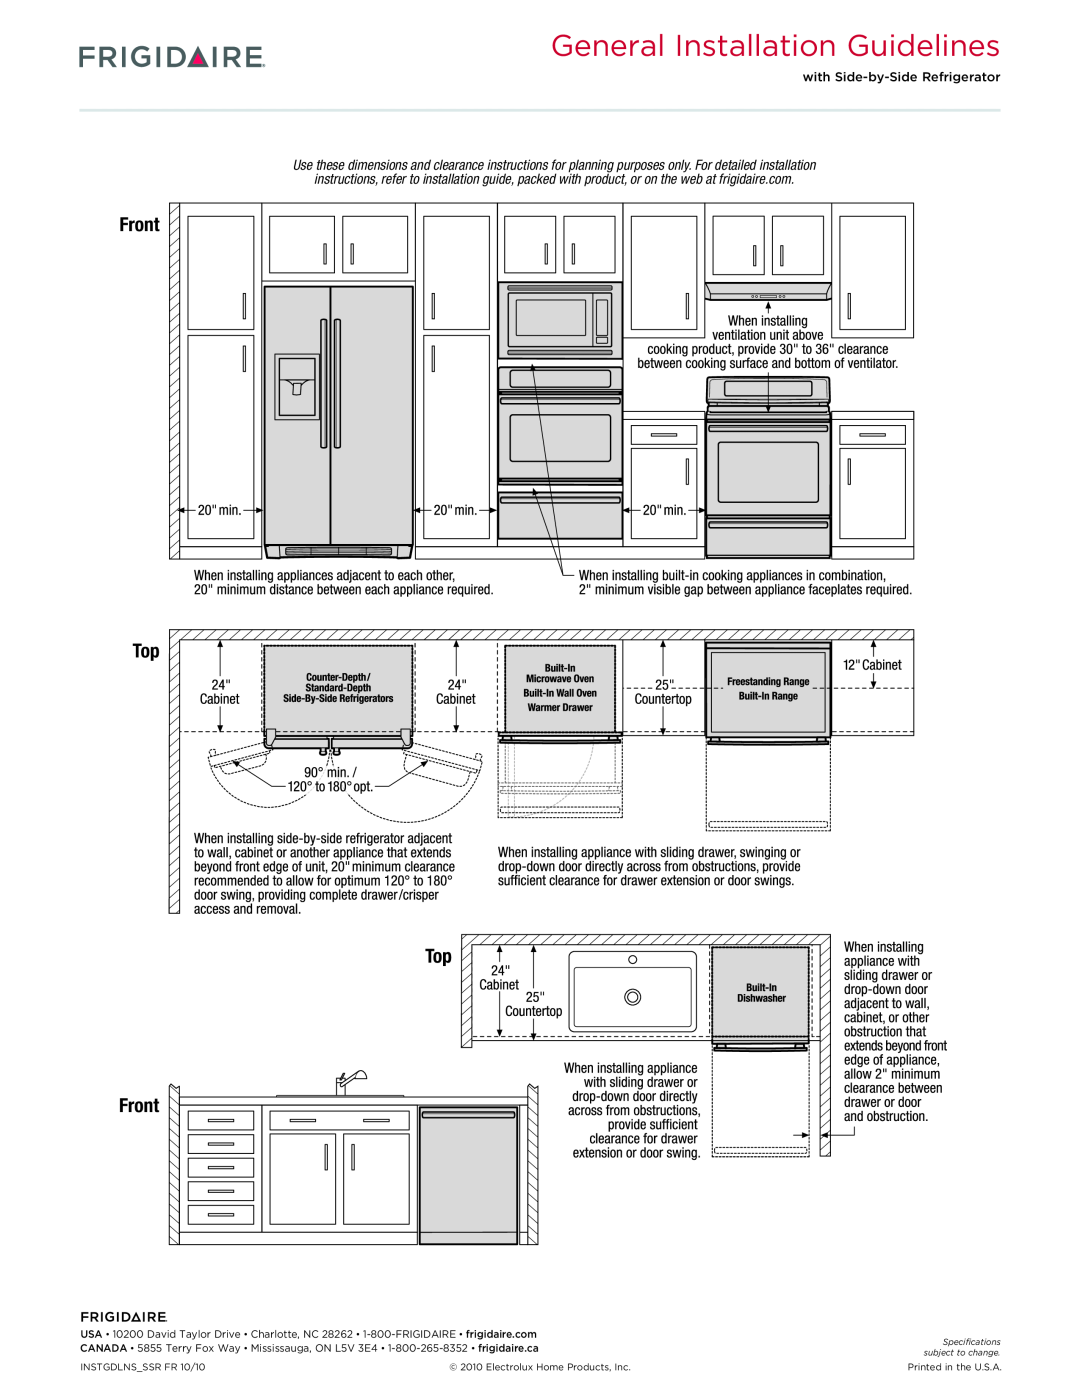 Frigidaire FPES3085KF dimensions General Installation Guidelines, Top Front 